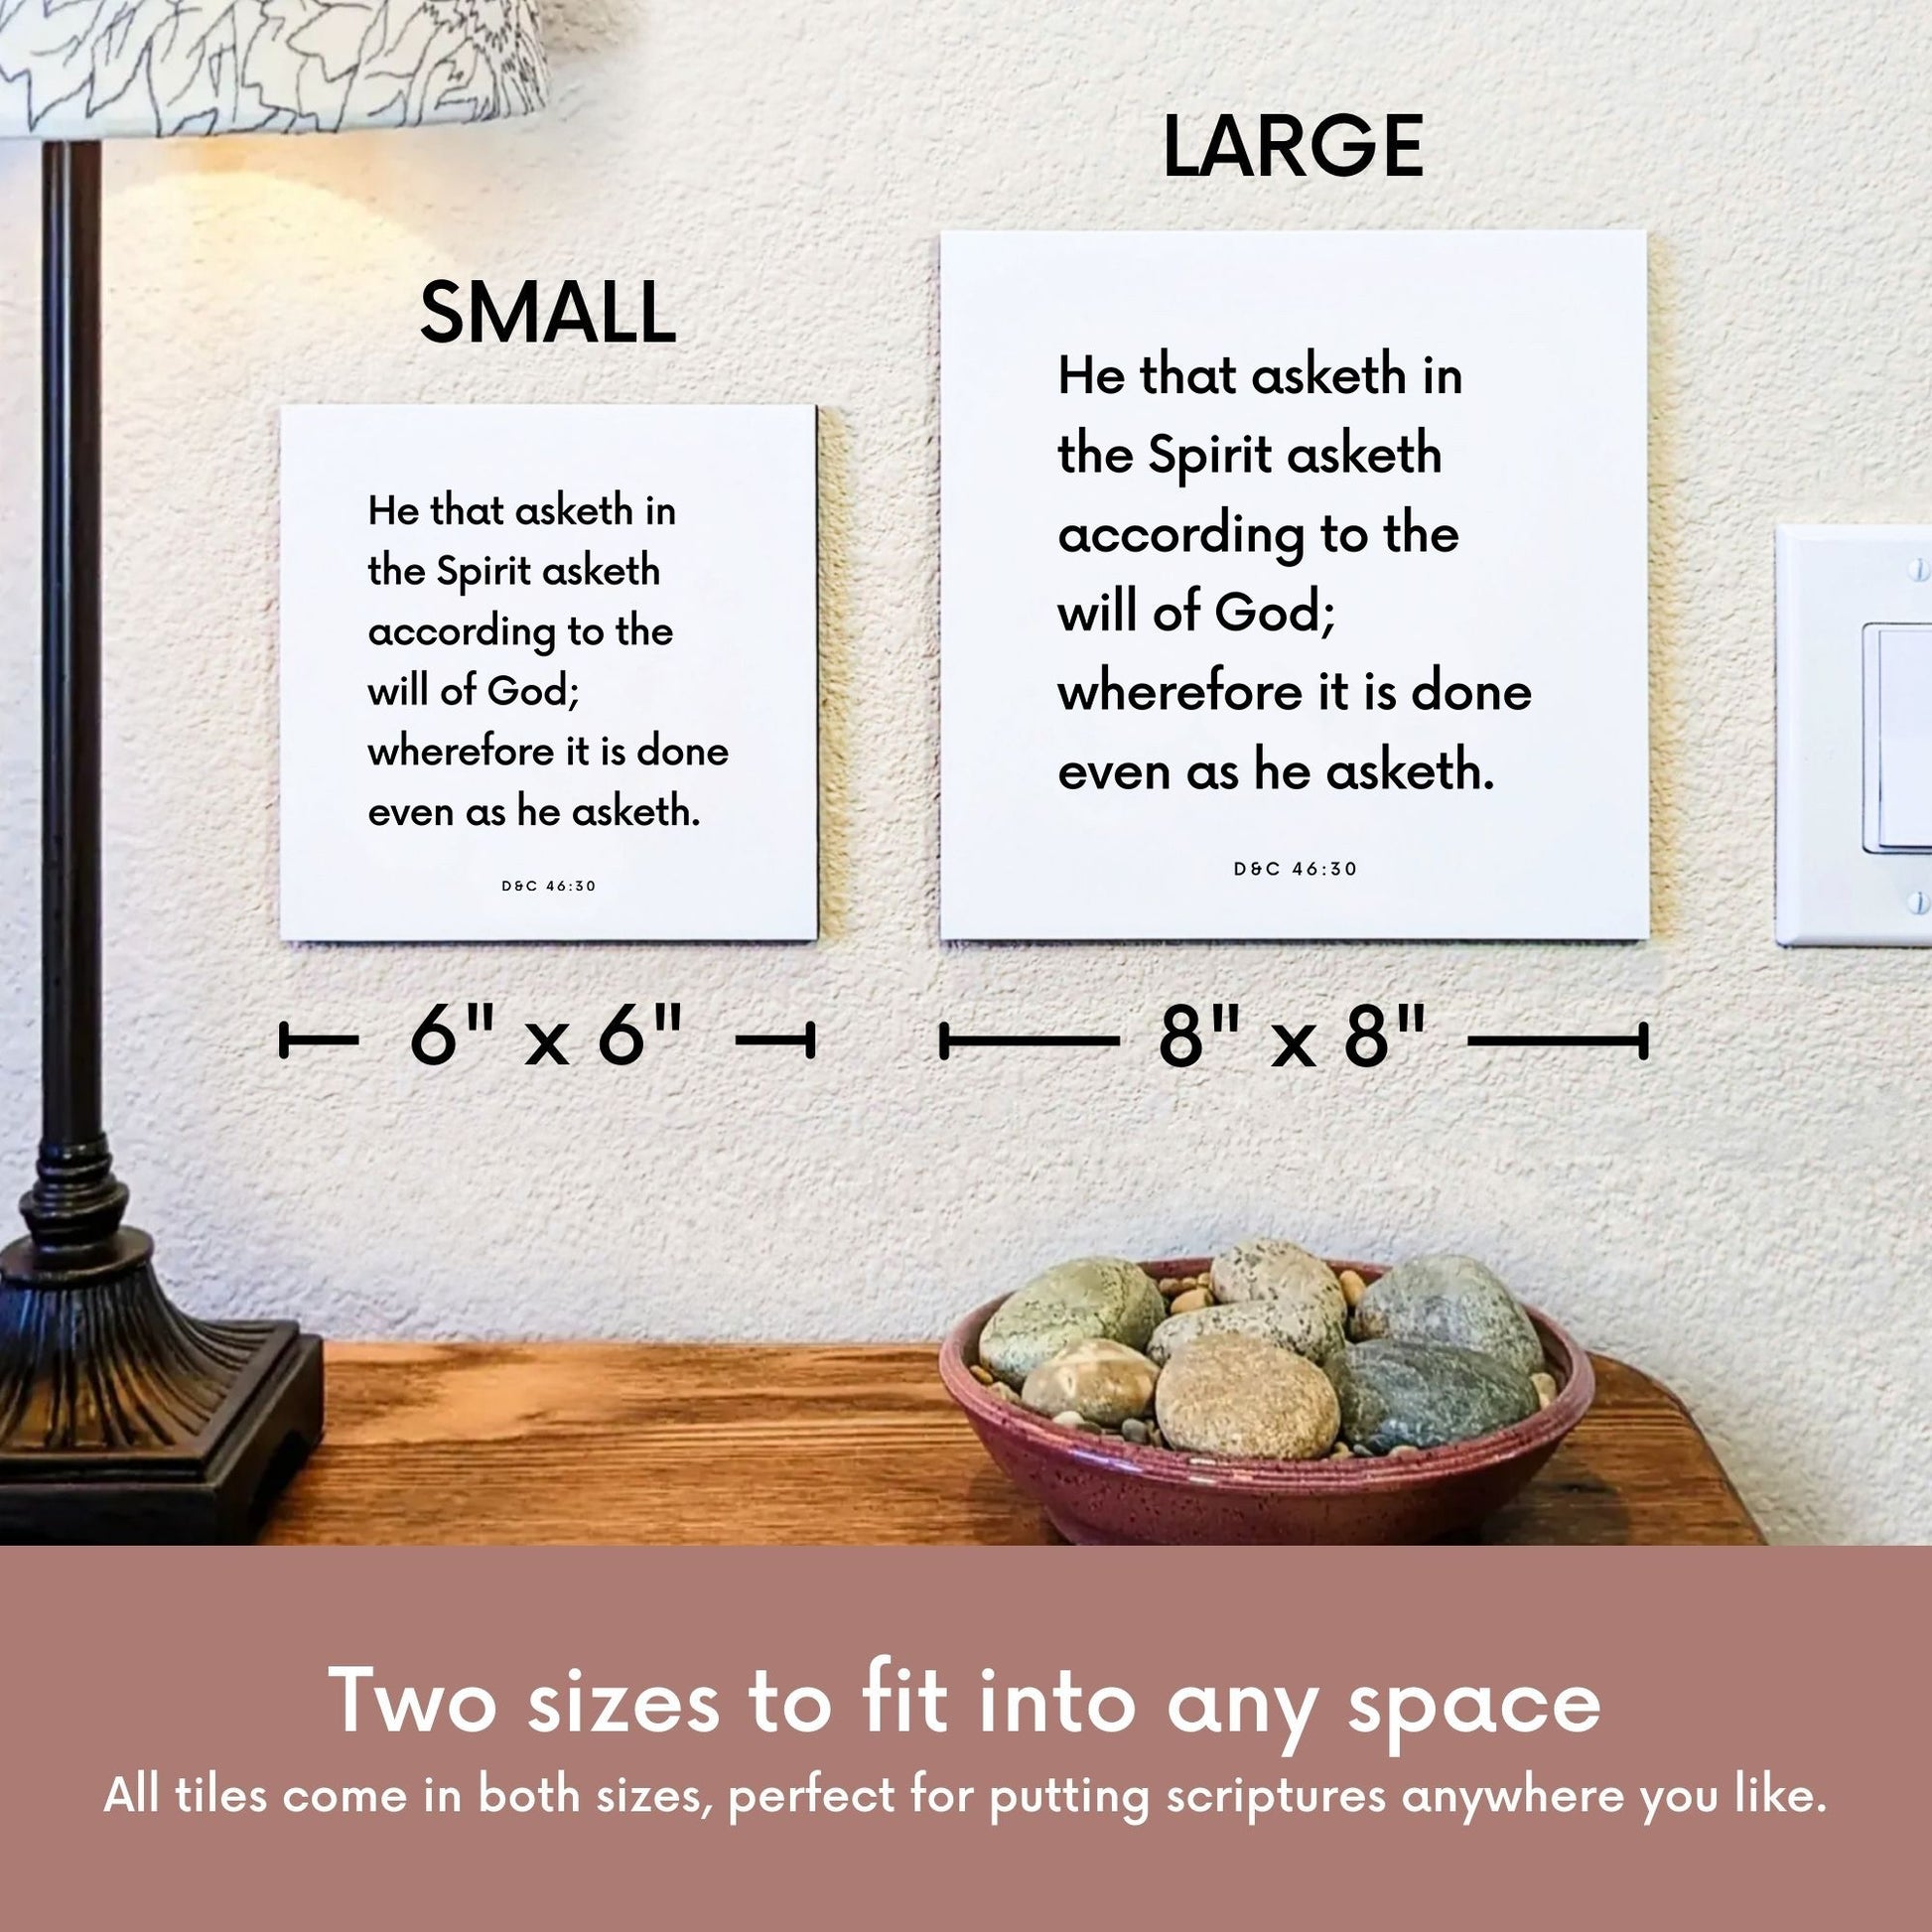 Scripture tile size comparison for D&C 46:30 - "He that asketh in the Spirit"